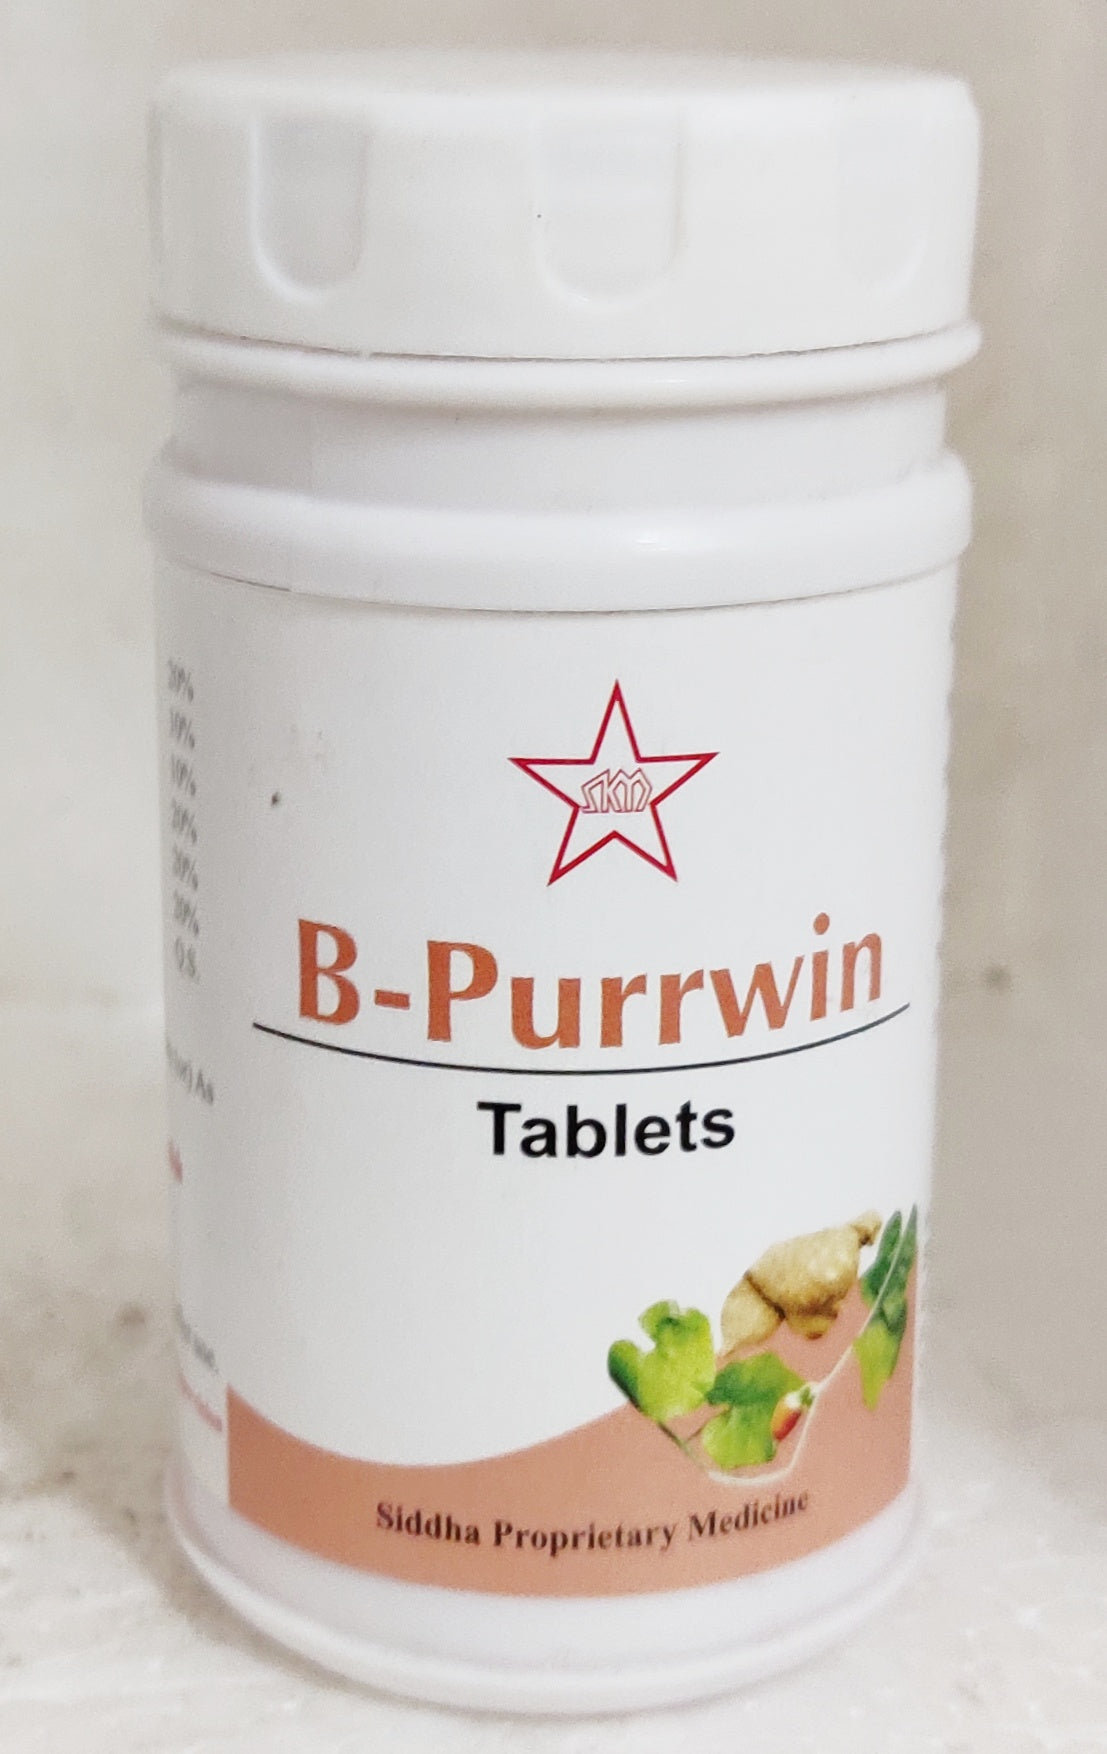 Shop B-Purrwin 100Tablets at price 290.00 from SKM Online - Ayush Care